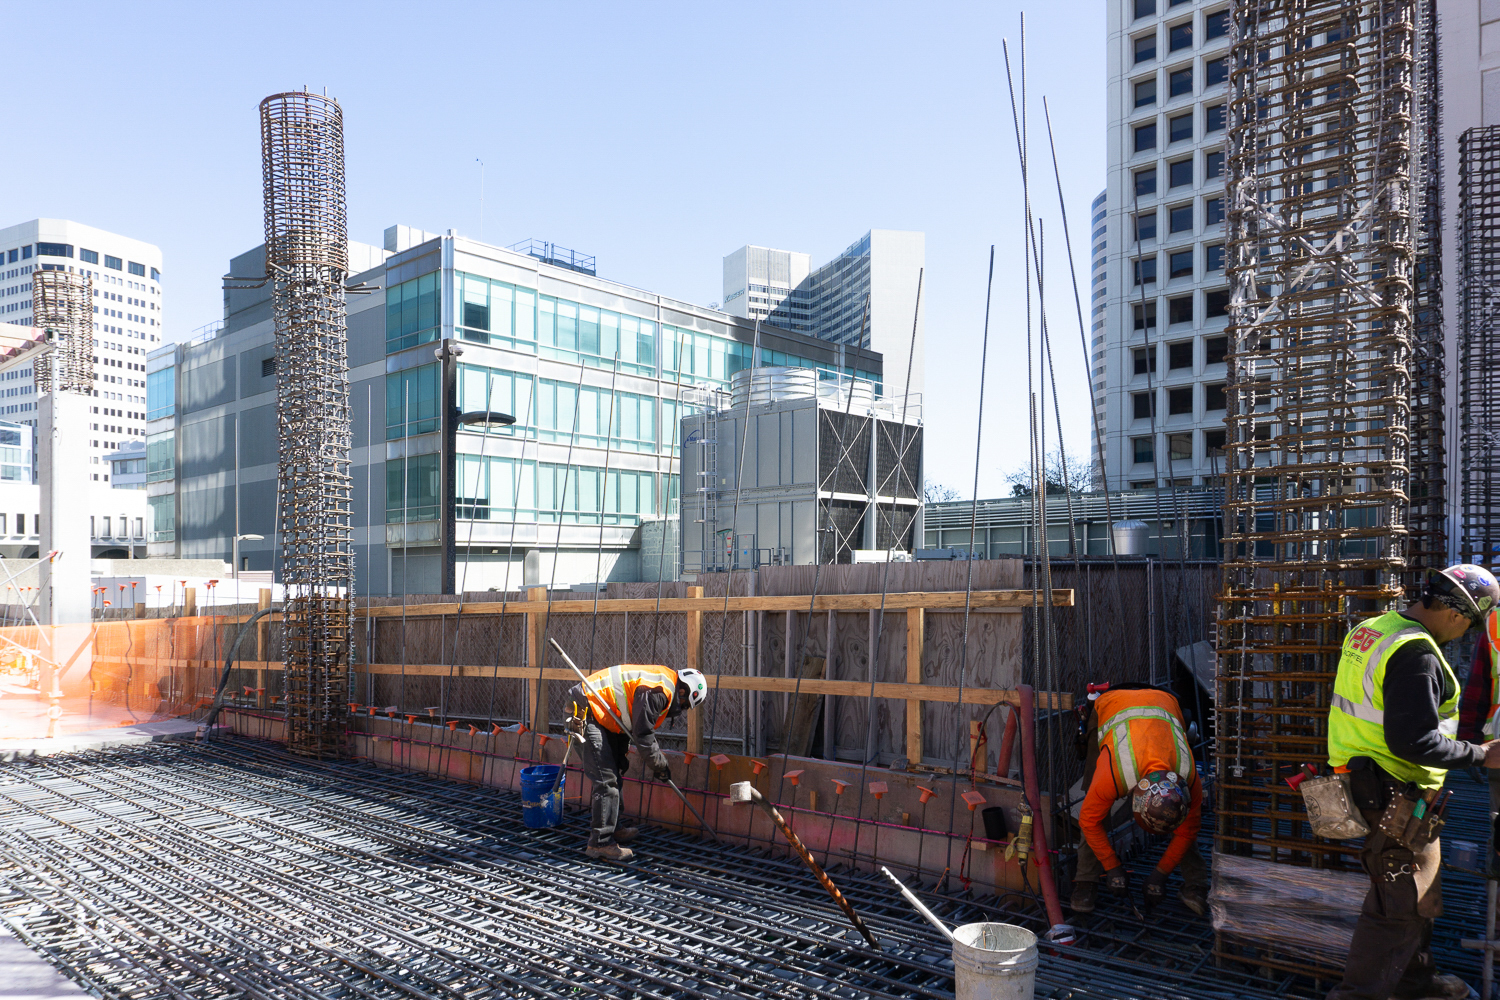 1900 Broadway construction site overlooking the possible future home for 415 20th Street, Oakland's latest proposed tallest tower, image by author